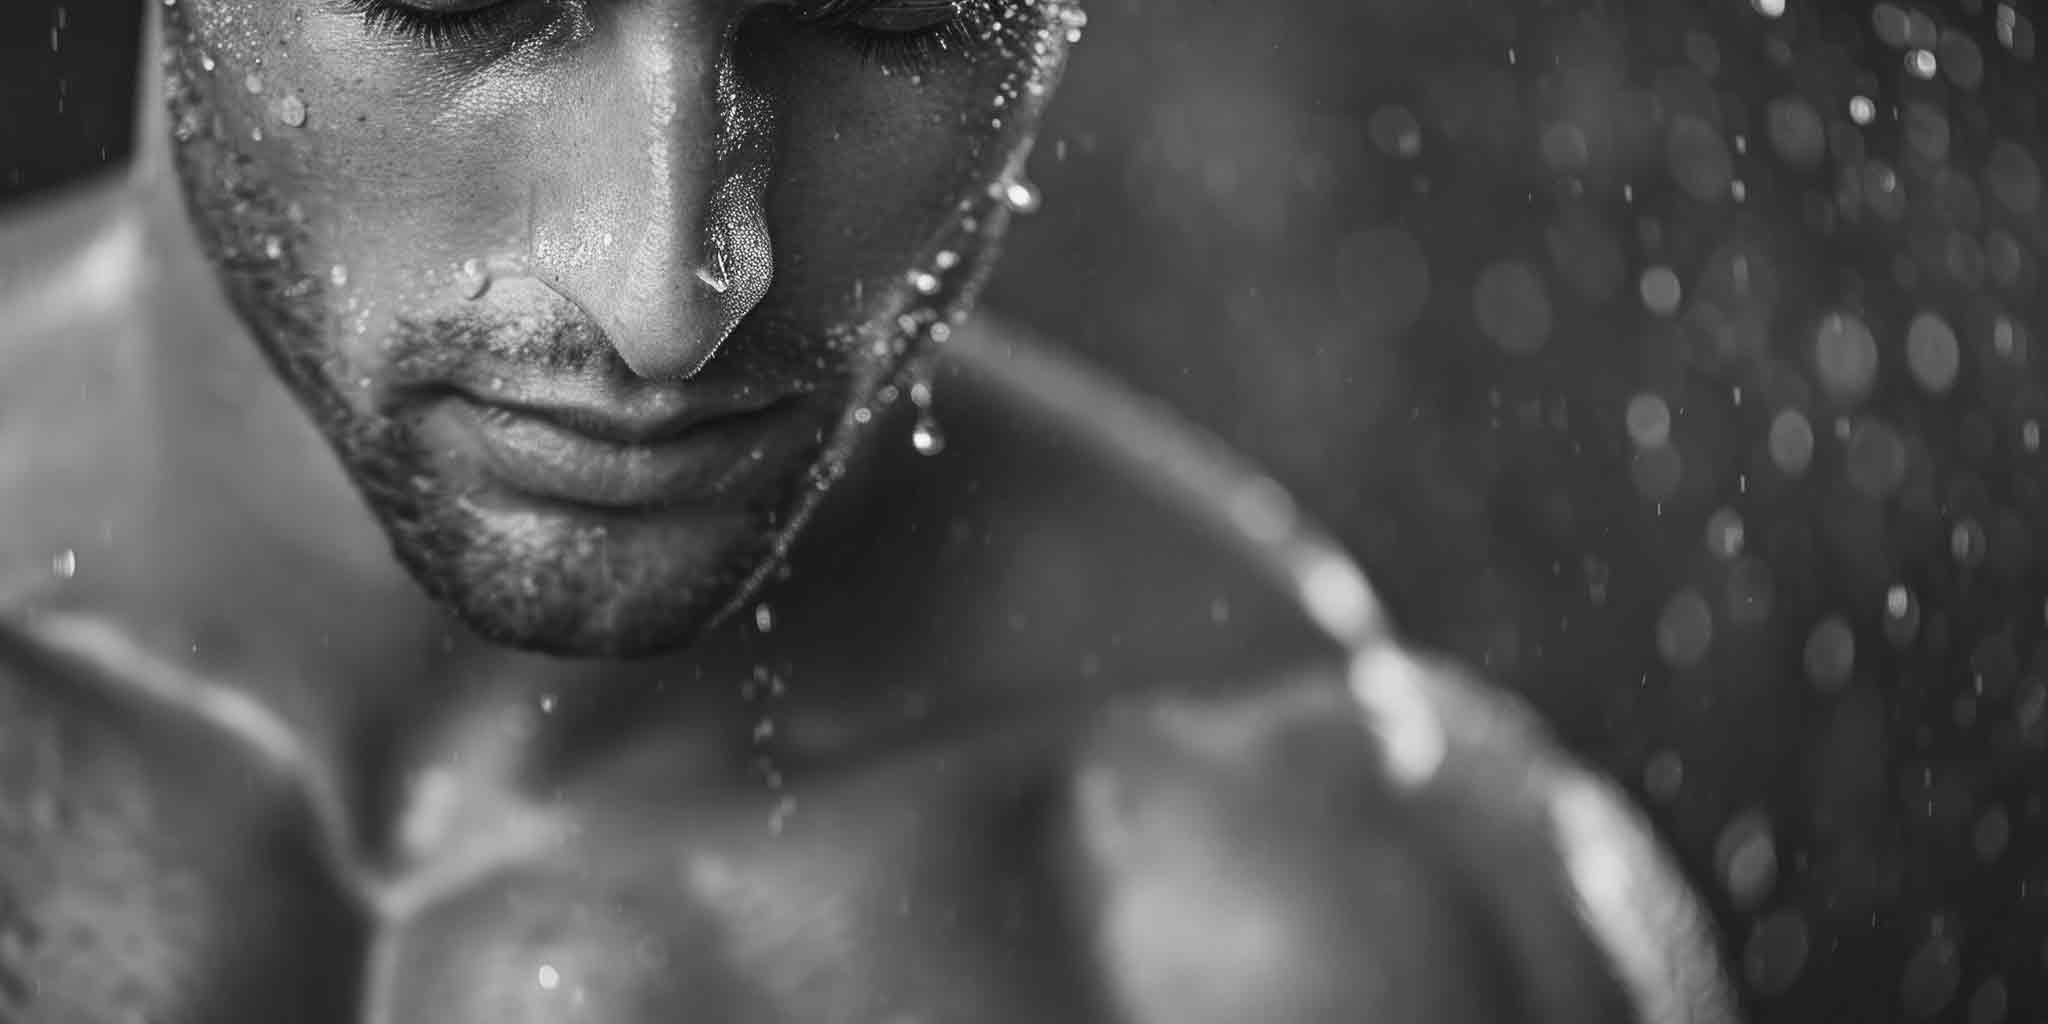 Close-up, black and white photo of a man's face partially covered with water droplets, reflecting a mood of refreshment or cleansing. This image repersents the thoughtfulness of the results, and or process of men's Brazilian waxing services in Toowoomba, capturing a sense of purity and rejuvenation post-treatment.